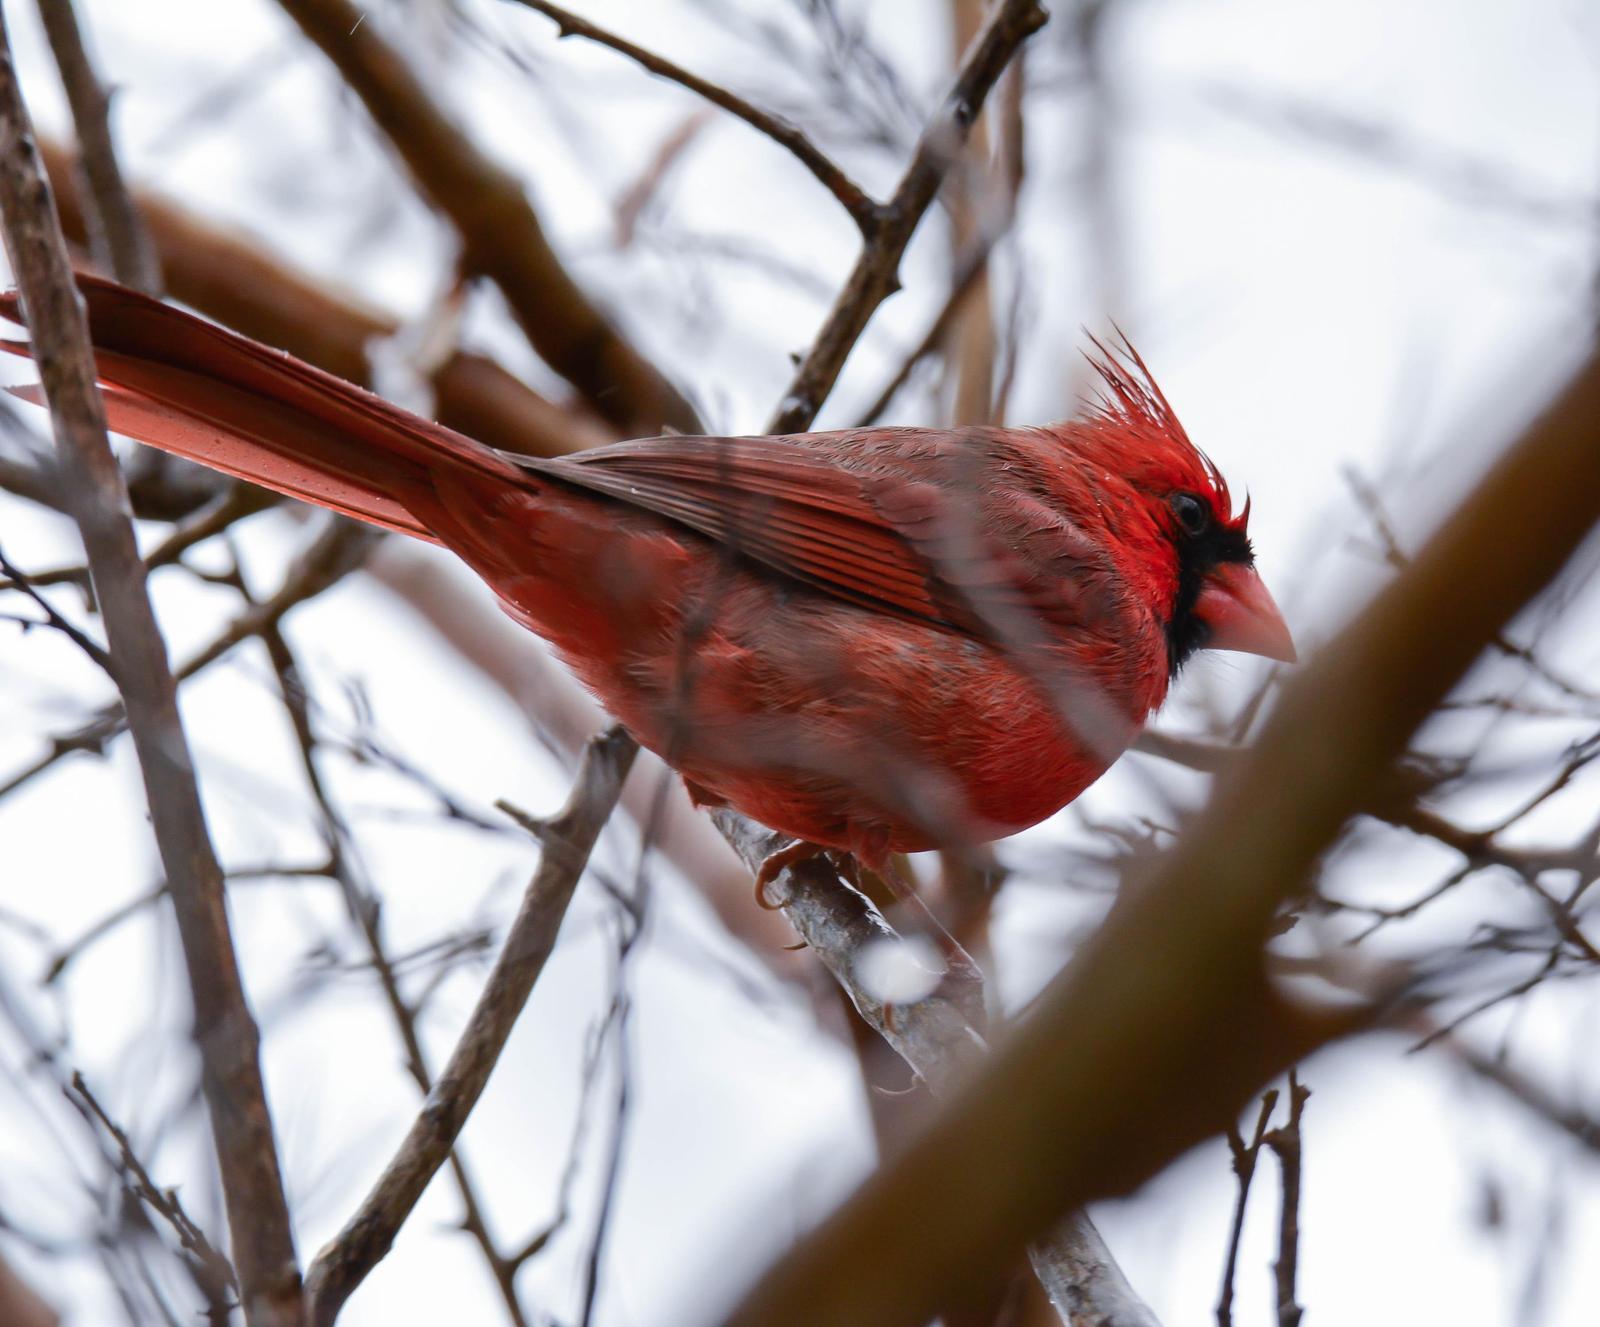 Northern Cardinal (Common) Photo by Wally Wenzel